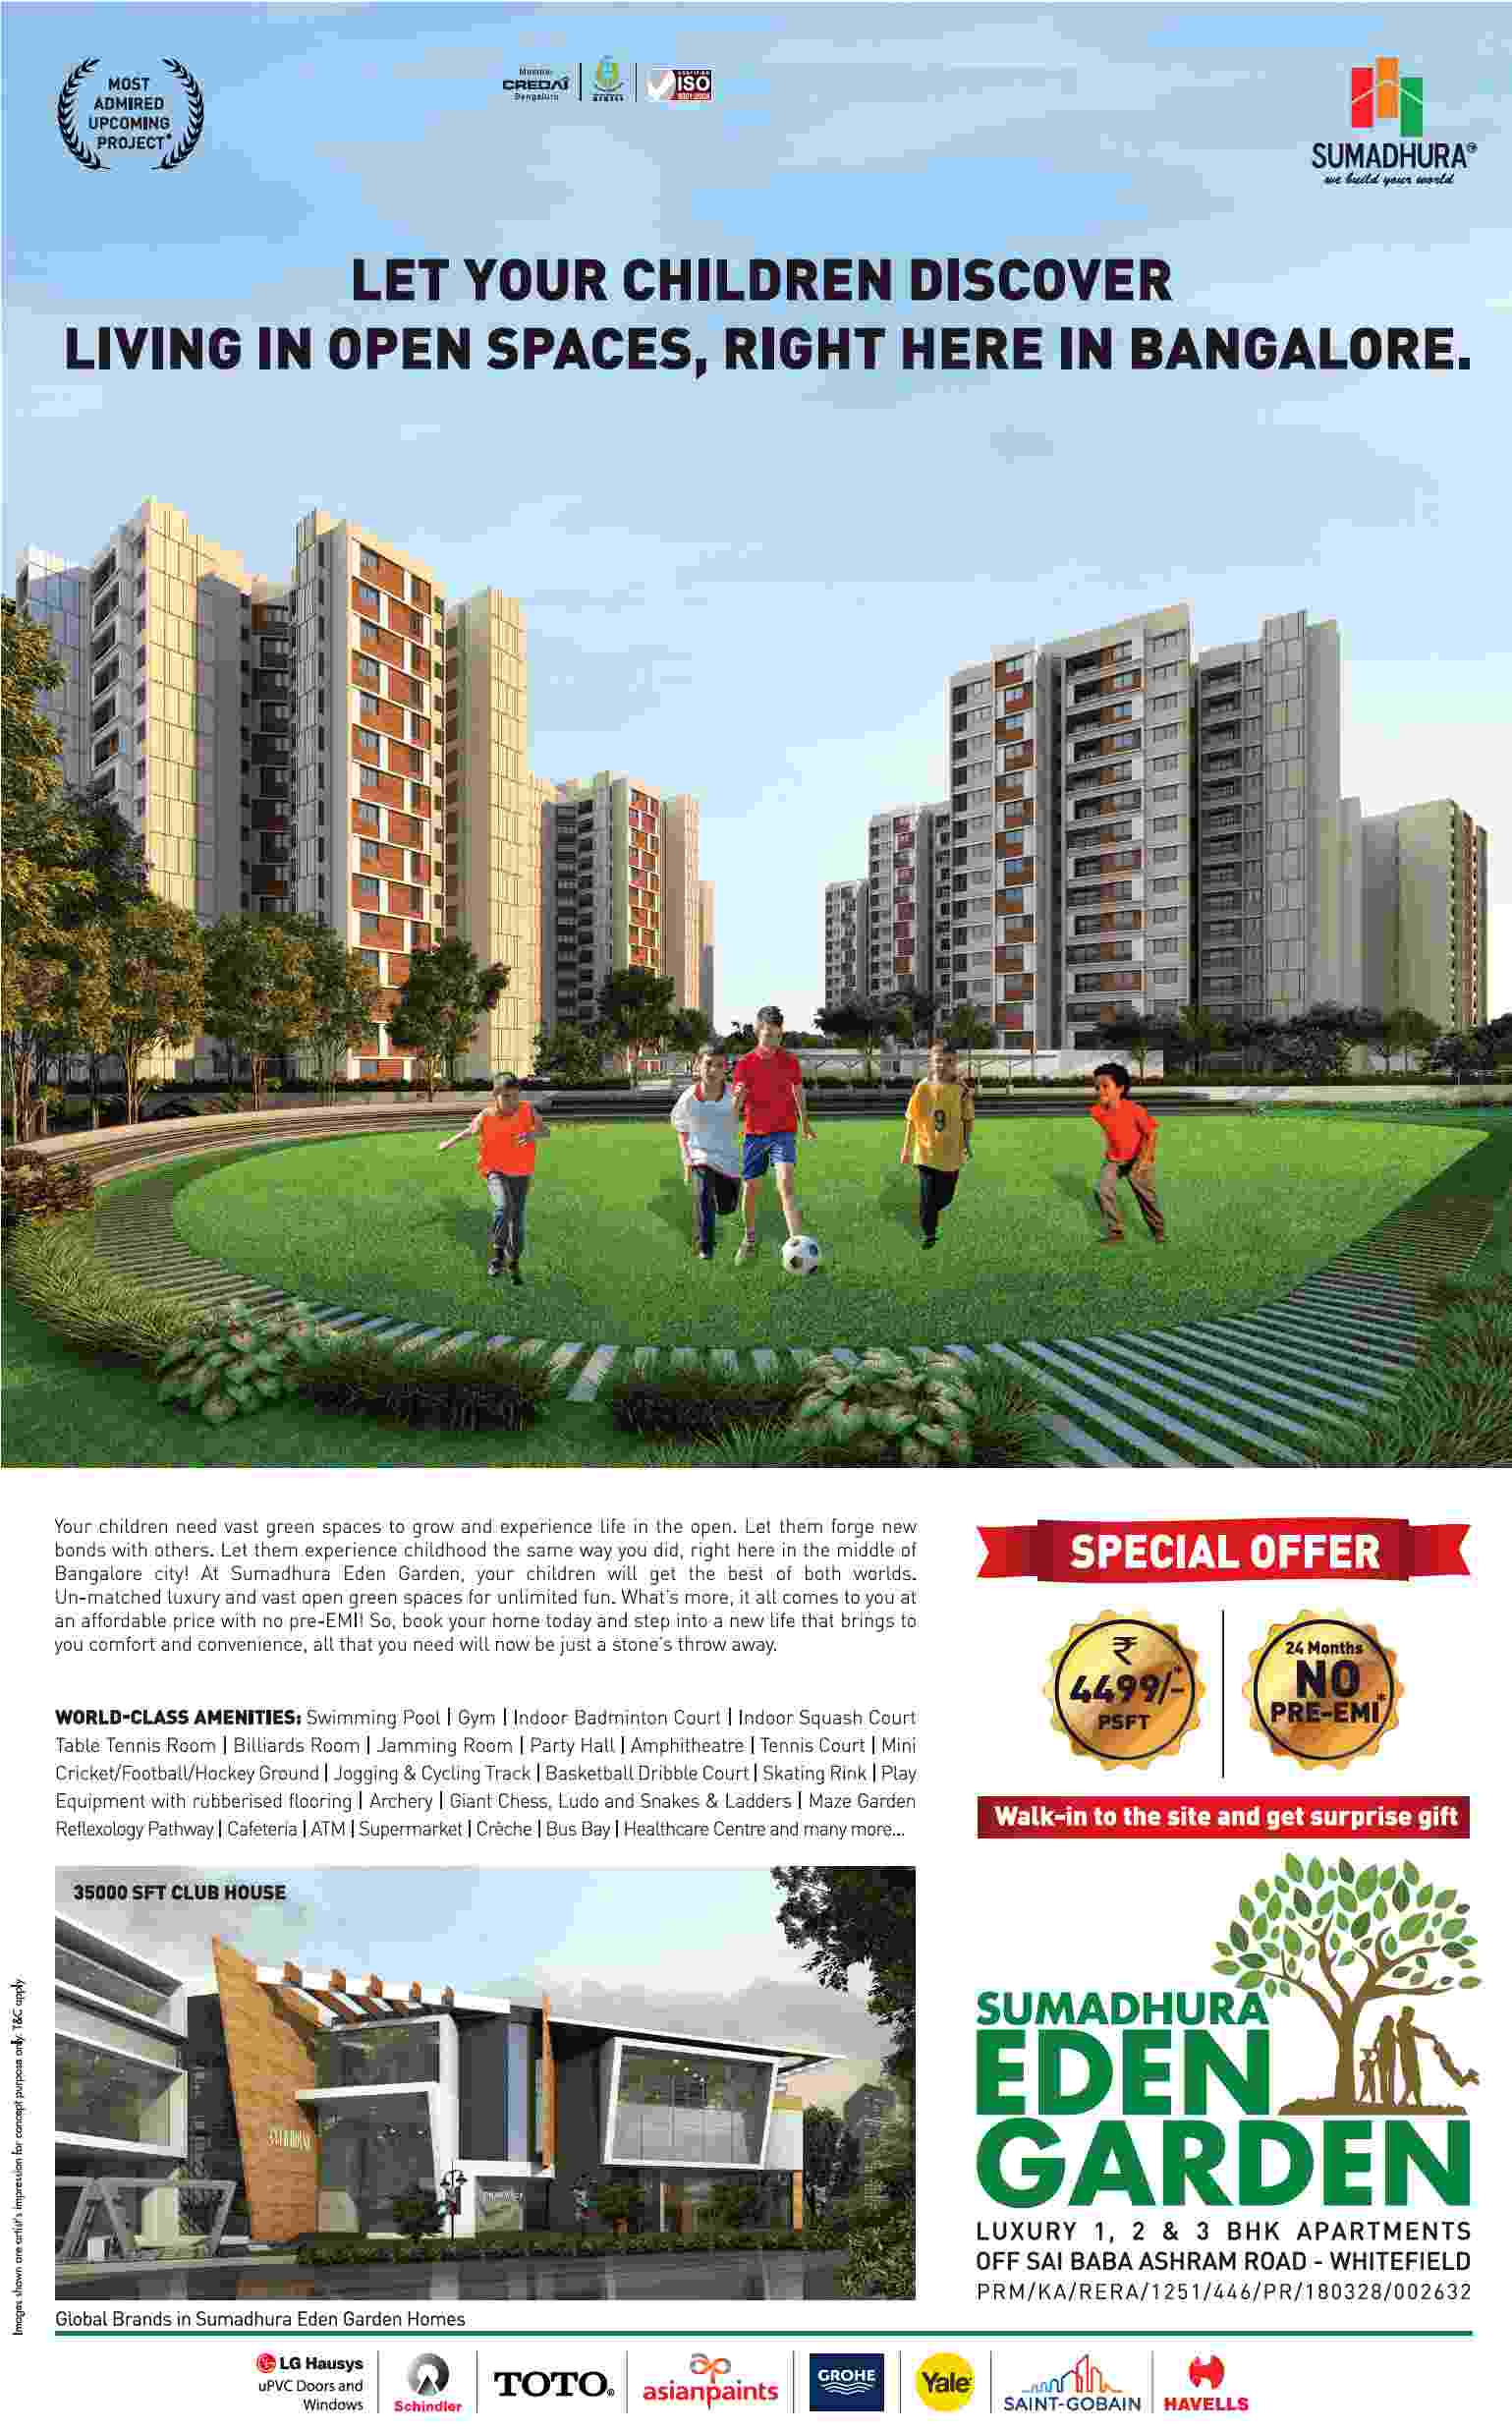 Book home at Rs. 4499 per sq.ft. with no pre-EMI for 24 months at Sumadhura Eden Garden in Bangalore